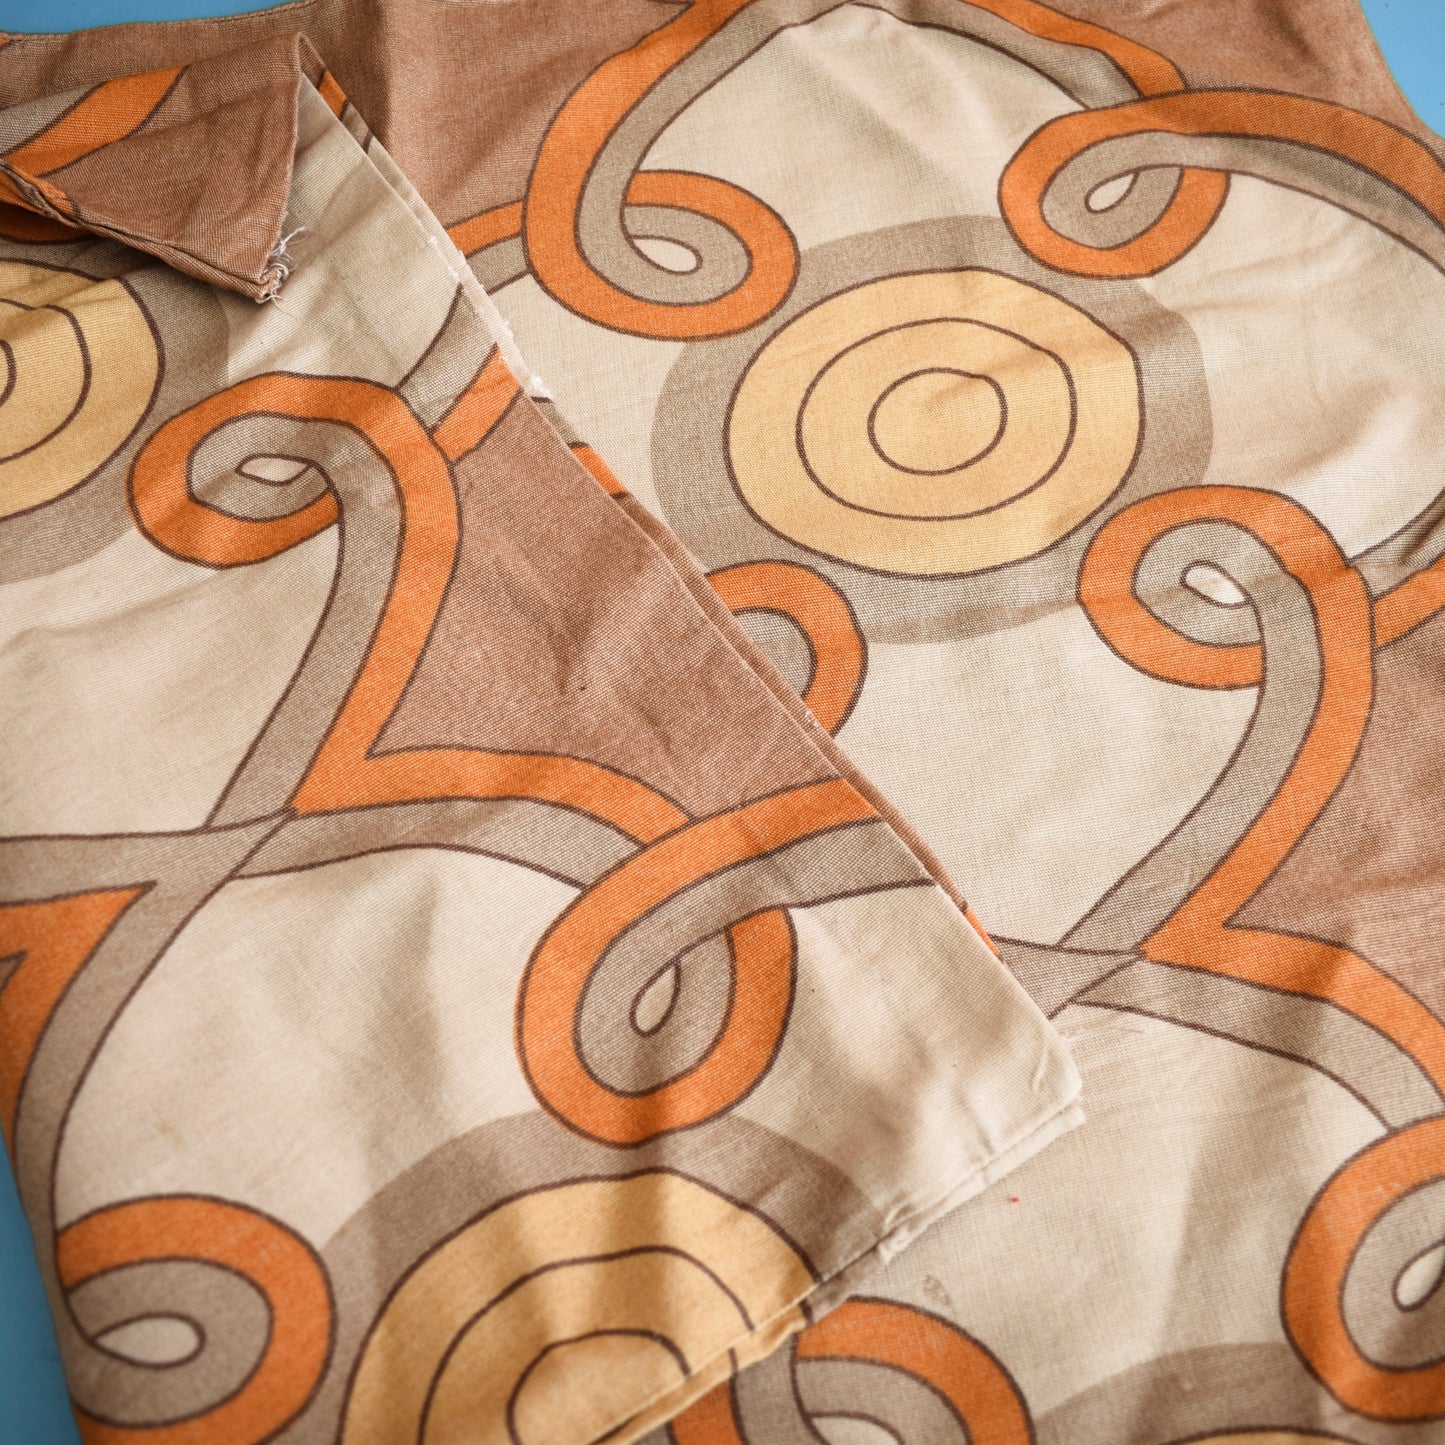 Vintage 1960s Handmade Pillow Cases / Cushions - Brown Geometric